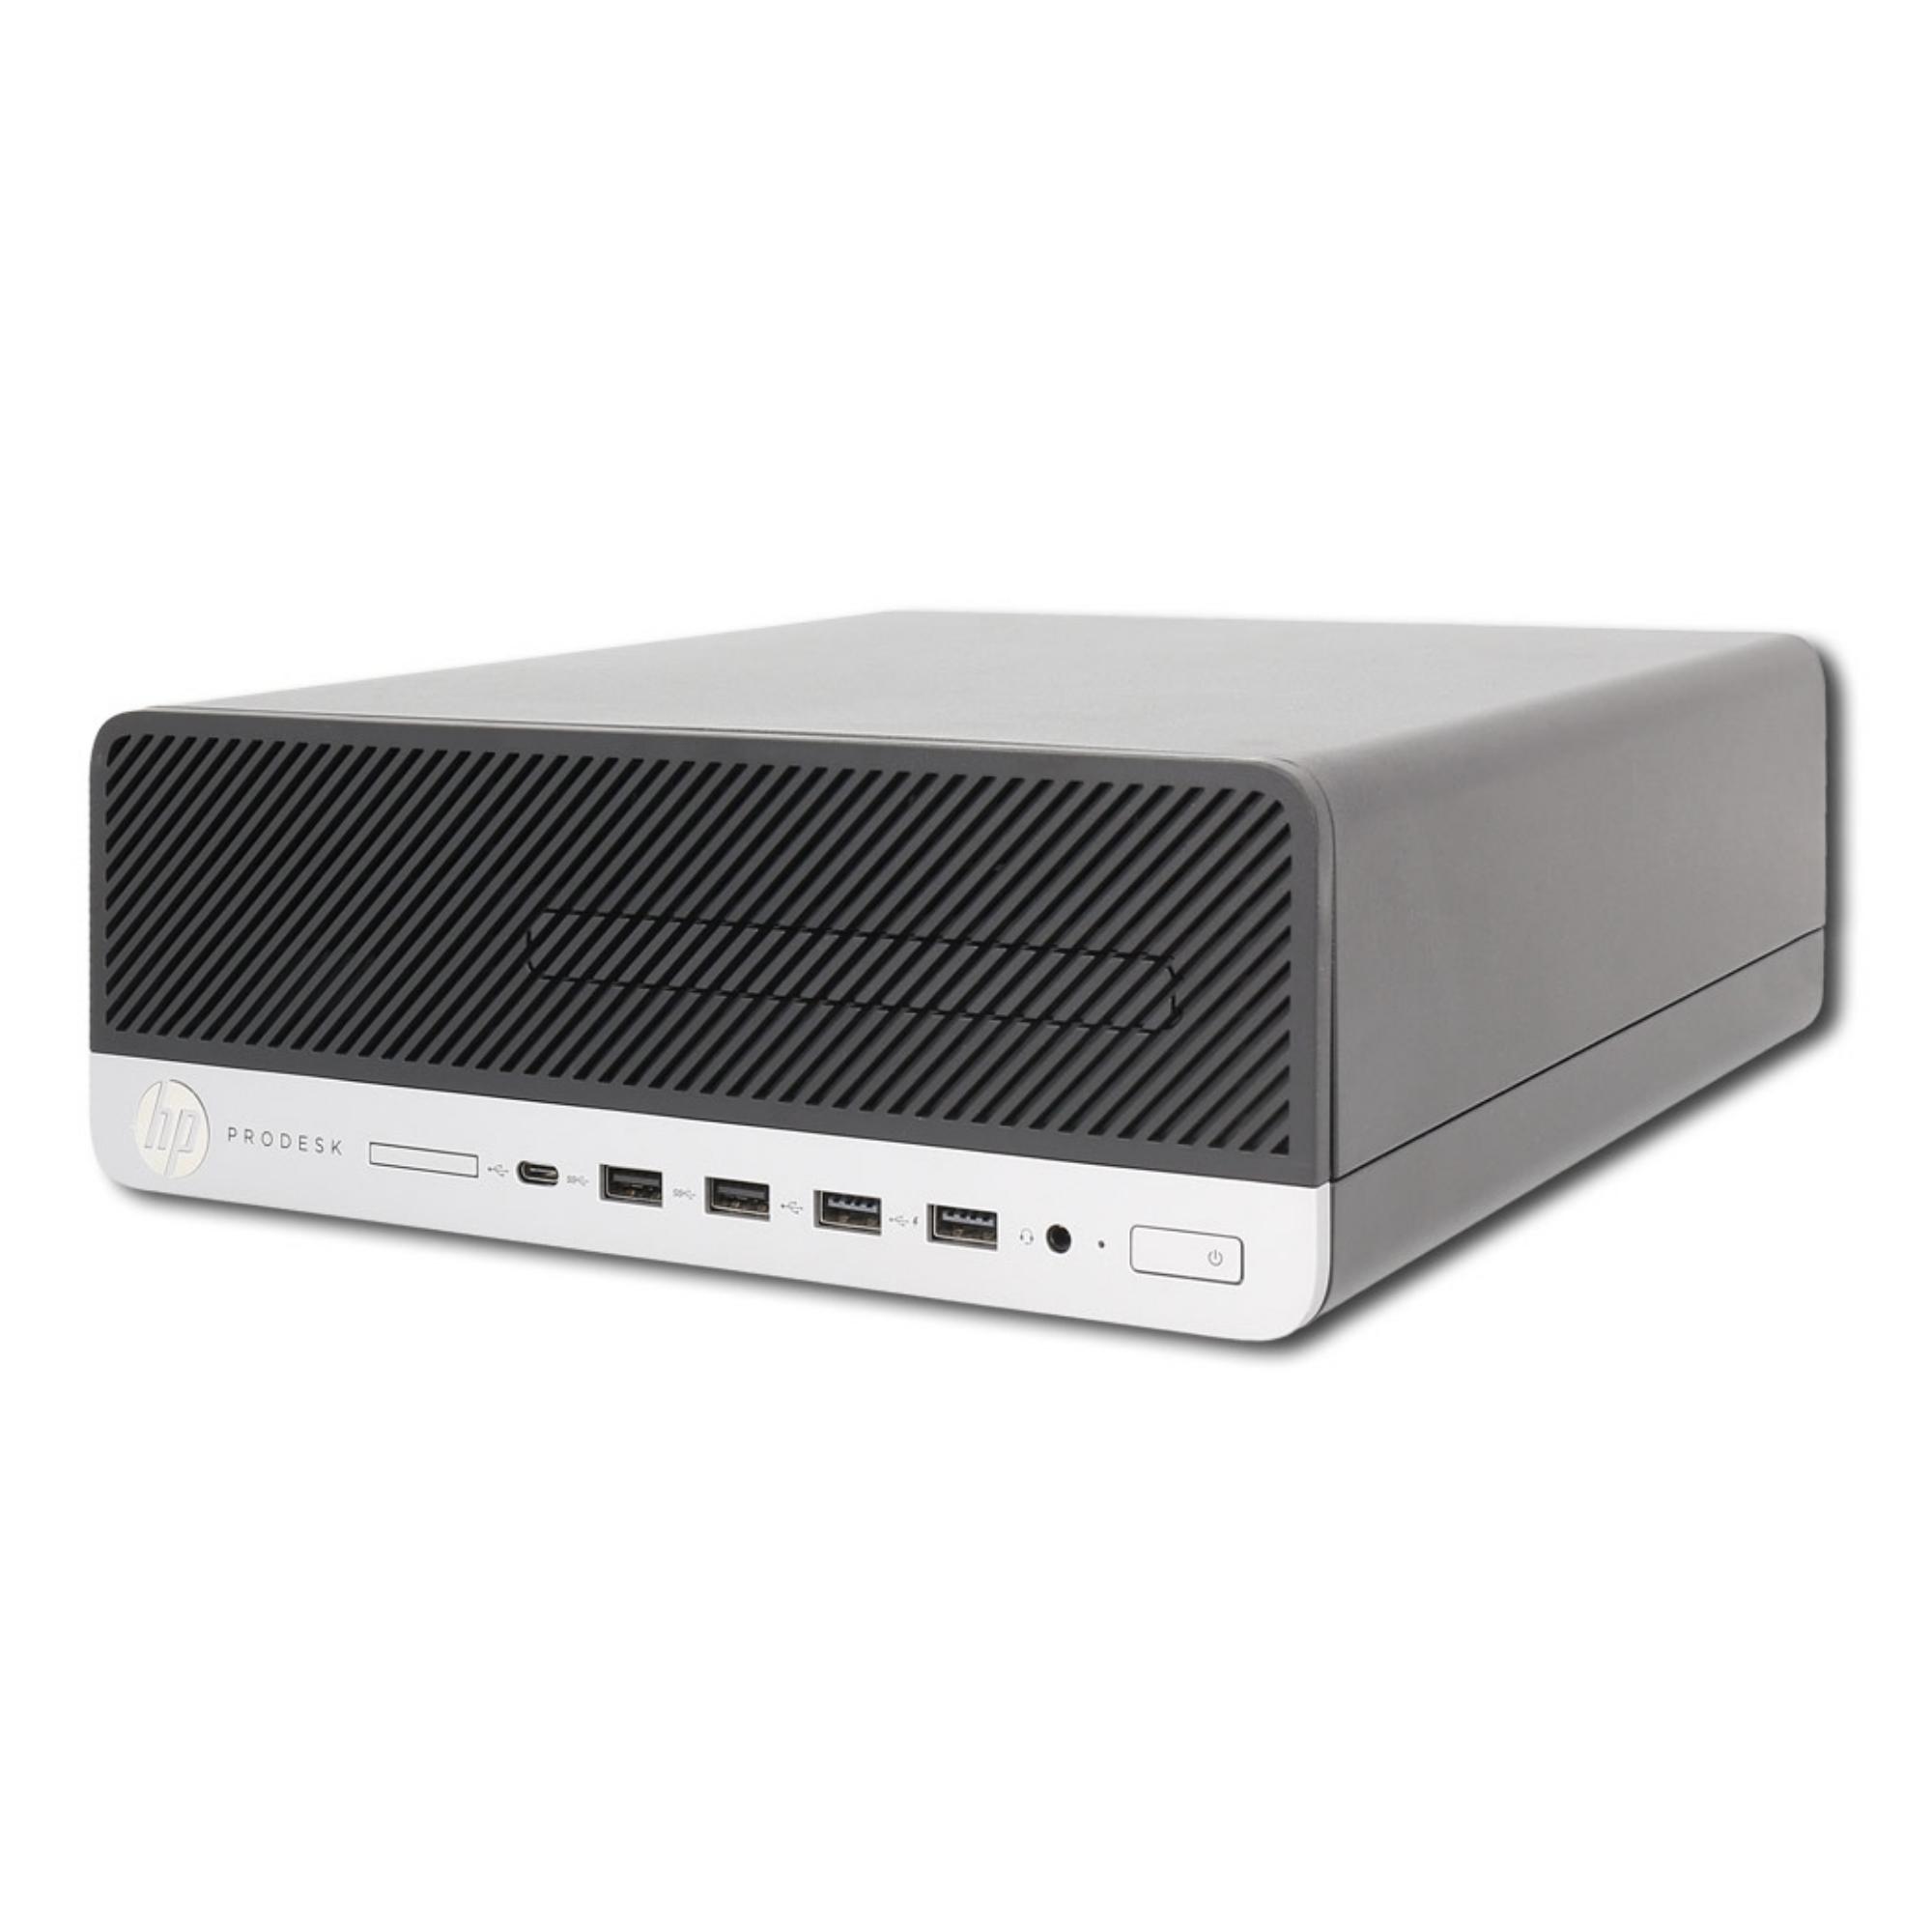 Mini Tower – HP PRODESK 600 G3 / I5-6500 / 500GB HDD / 8GB / SFF / INTEL HD 530 / W10P – 1NE89ES-A<br><br><span STYLE="background:#39ac37;"><font color="white"> DISPONIBILE </font></span>